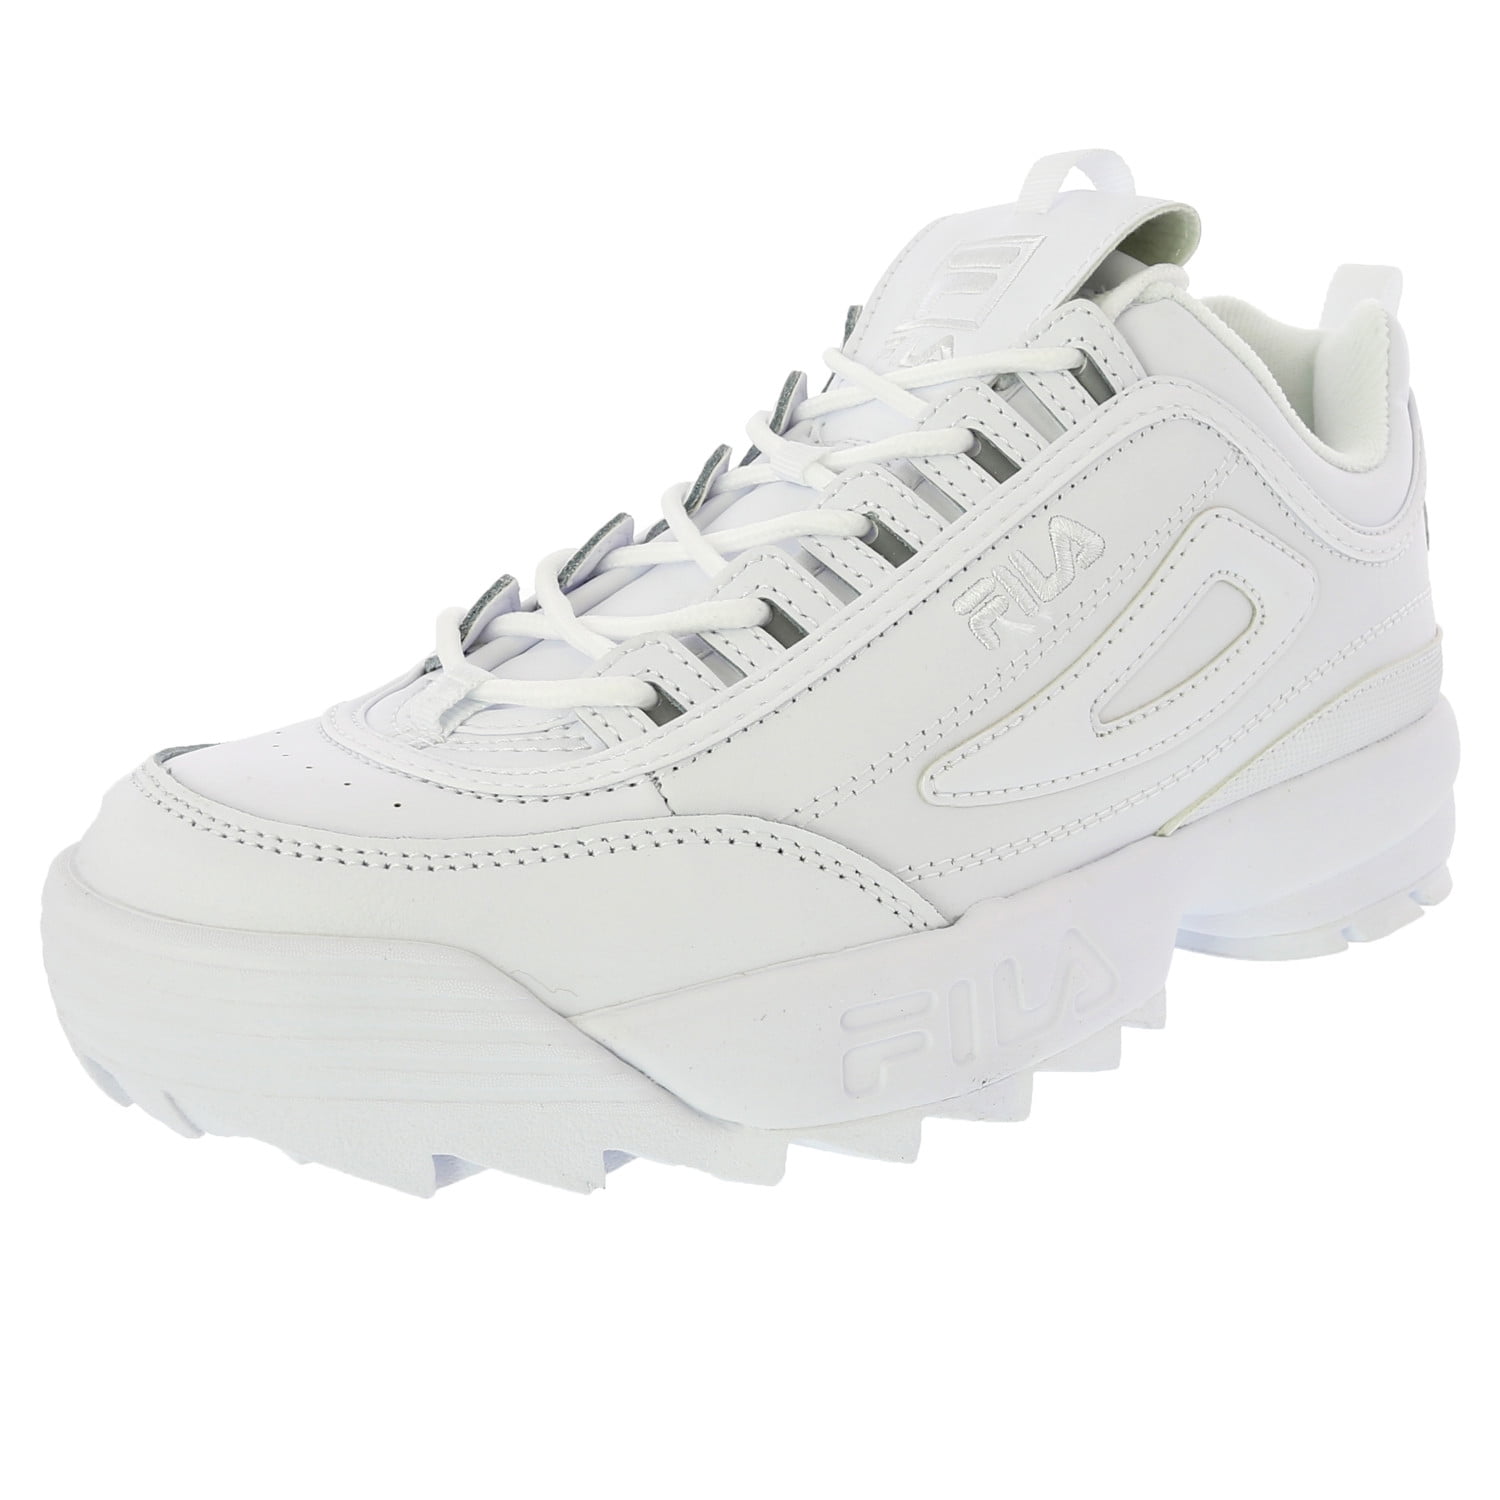 Ankle-High Patent Leather Sneaker - 8.5 